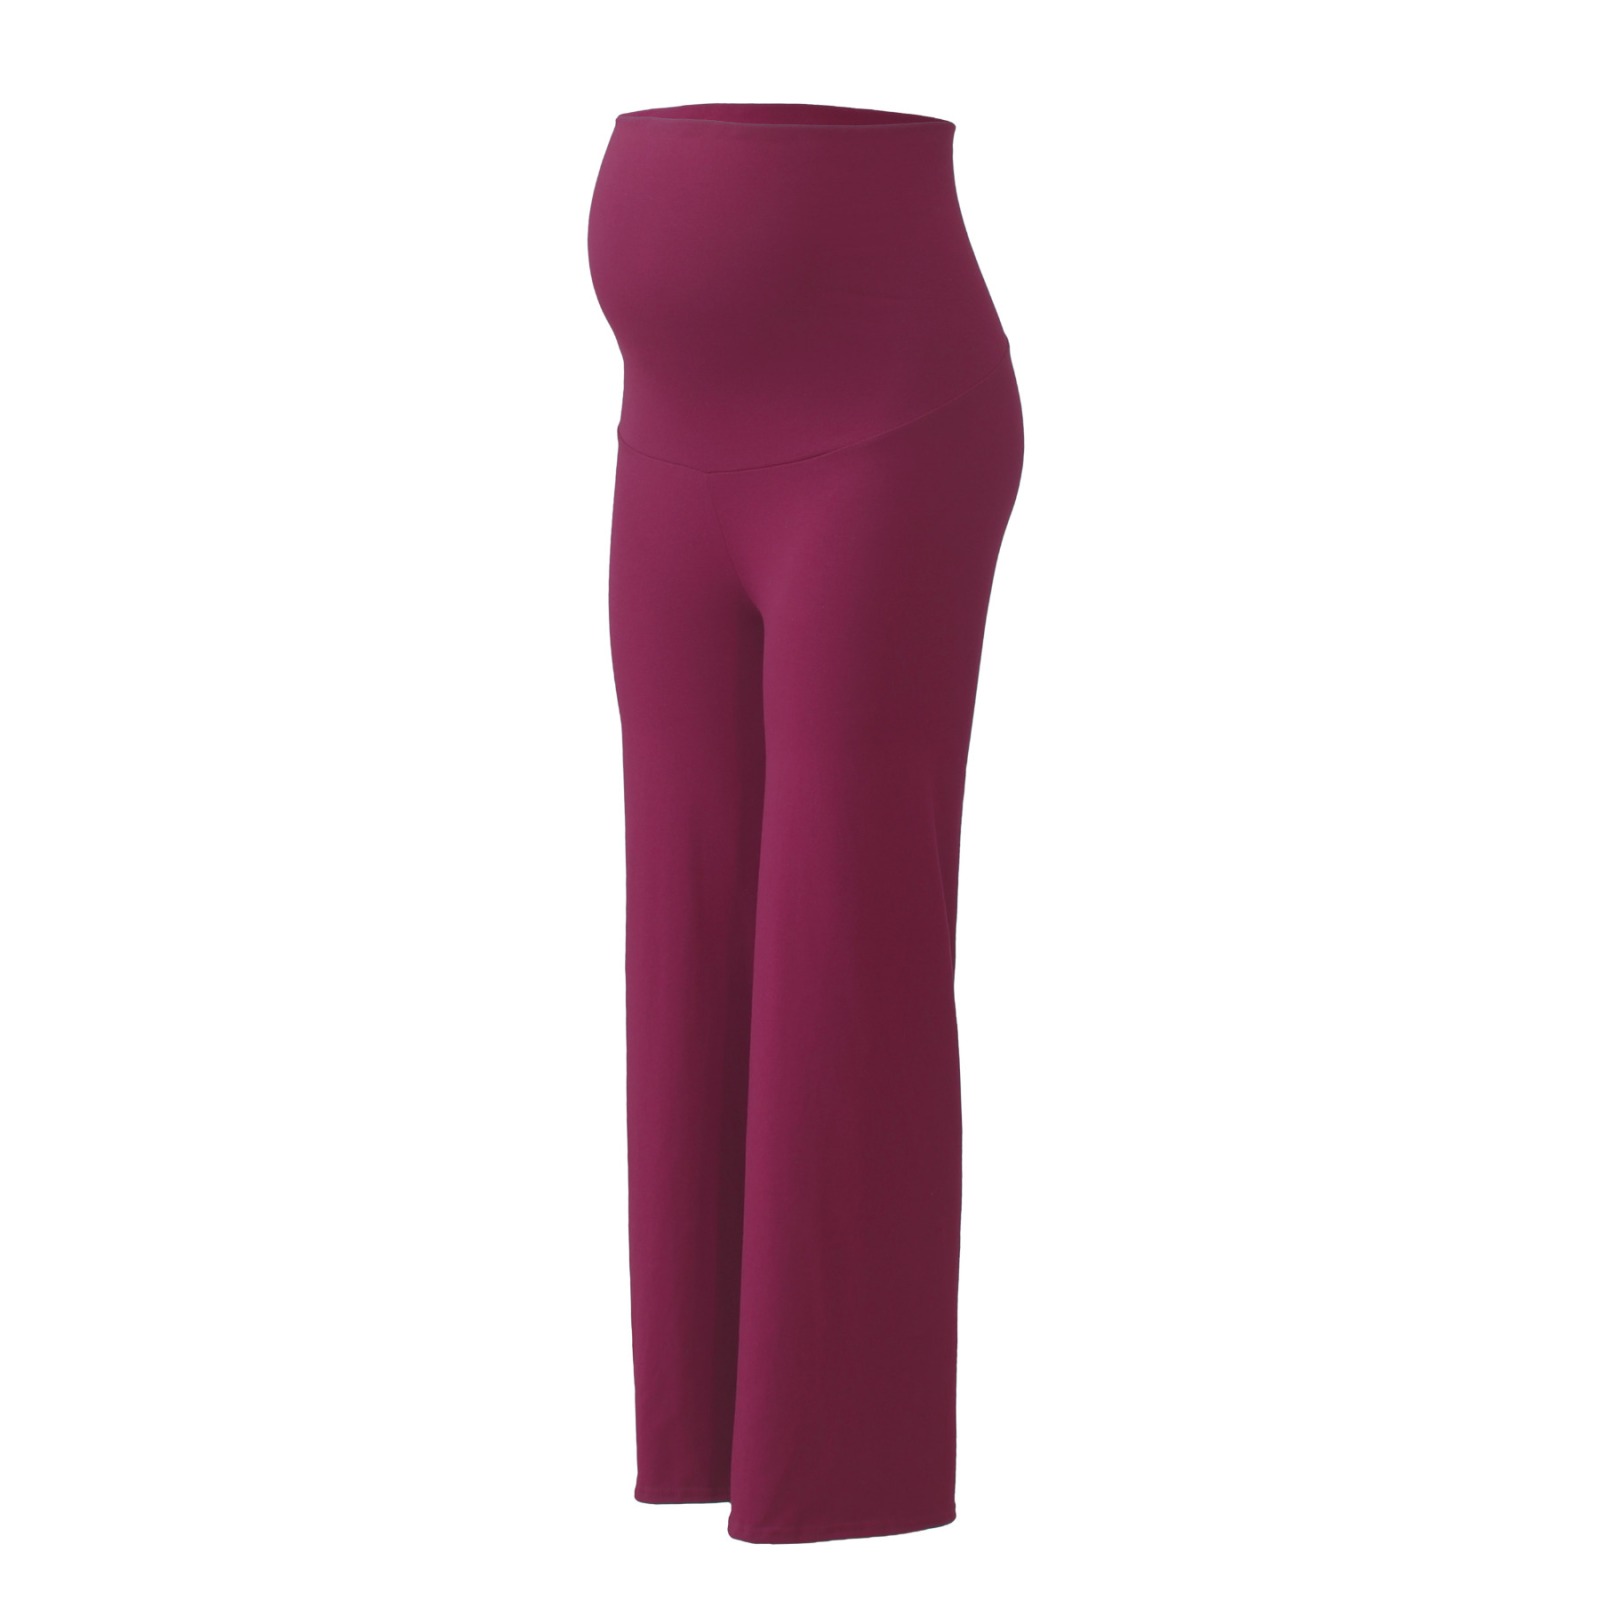 Mama Yoga pants Relaxed Fit berry red